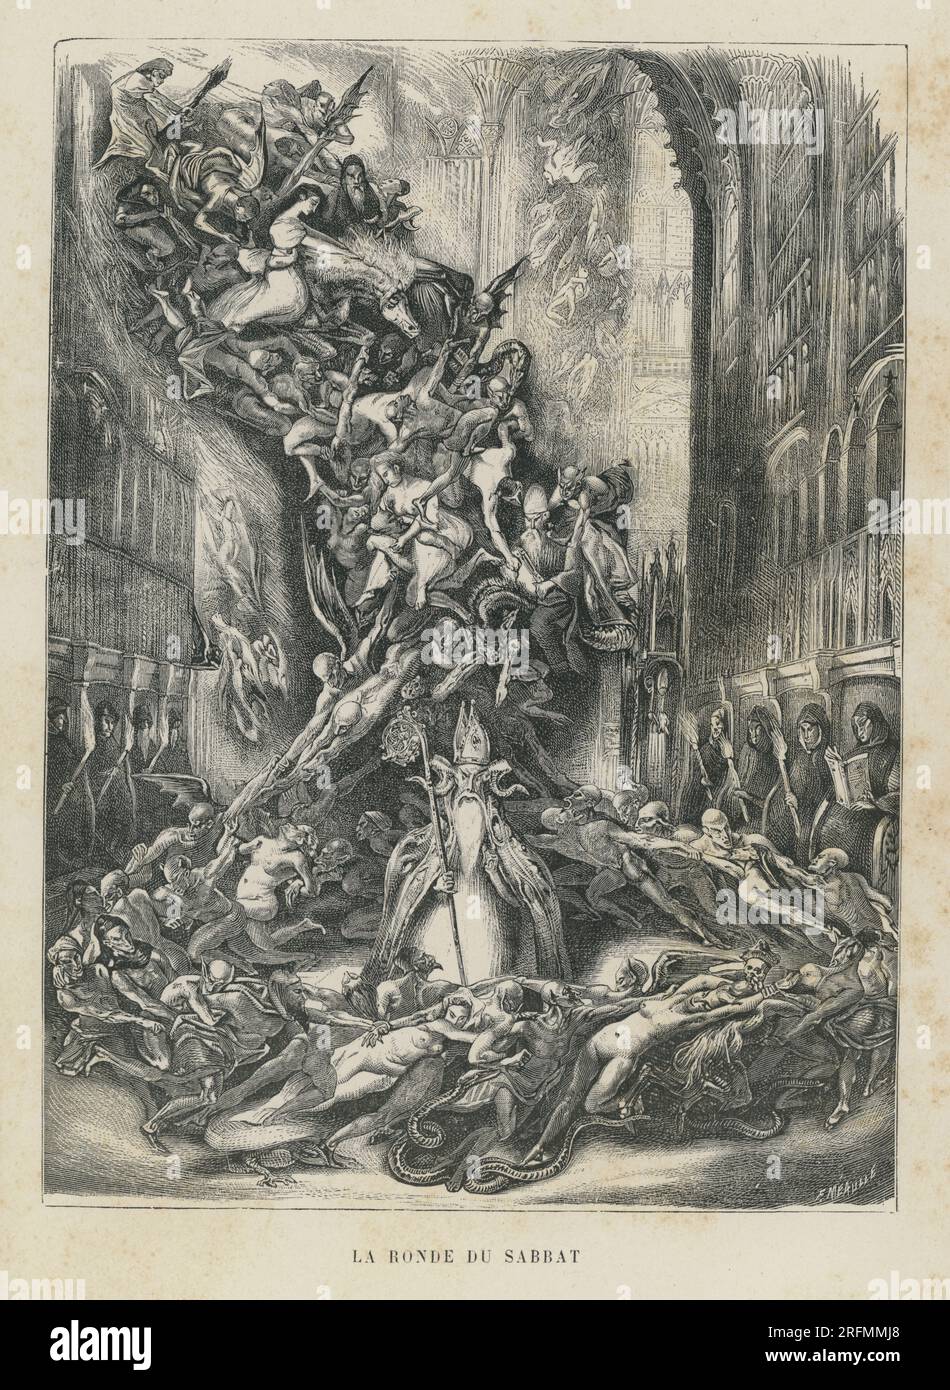 Illustration of 'Odes et Ballades' illustrating the poem 'La ronde du sabbat'.  Illustrator: Louis Boulanger. Illustration from 'Oeuvre poétique' (vol. I) and part of a set of engravings published in the Volume XII of Victor Hugo's 'Oeuvres Complètes'. Book published by the Société anonyme de publications périodiques P. Mouillot. Stock Photo